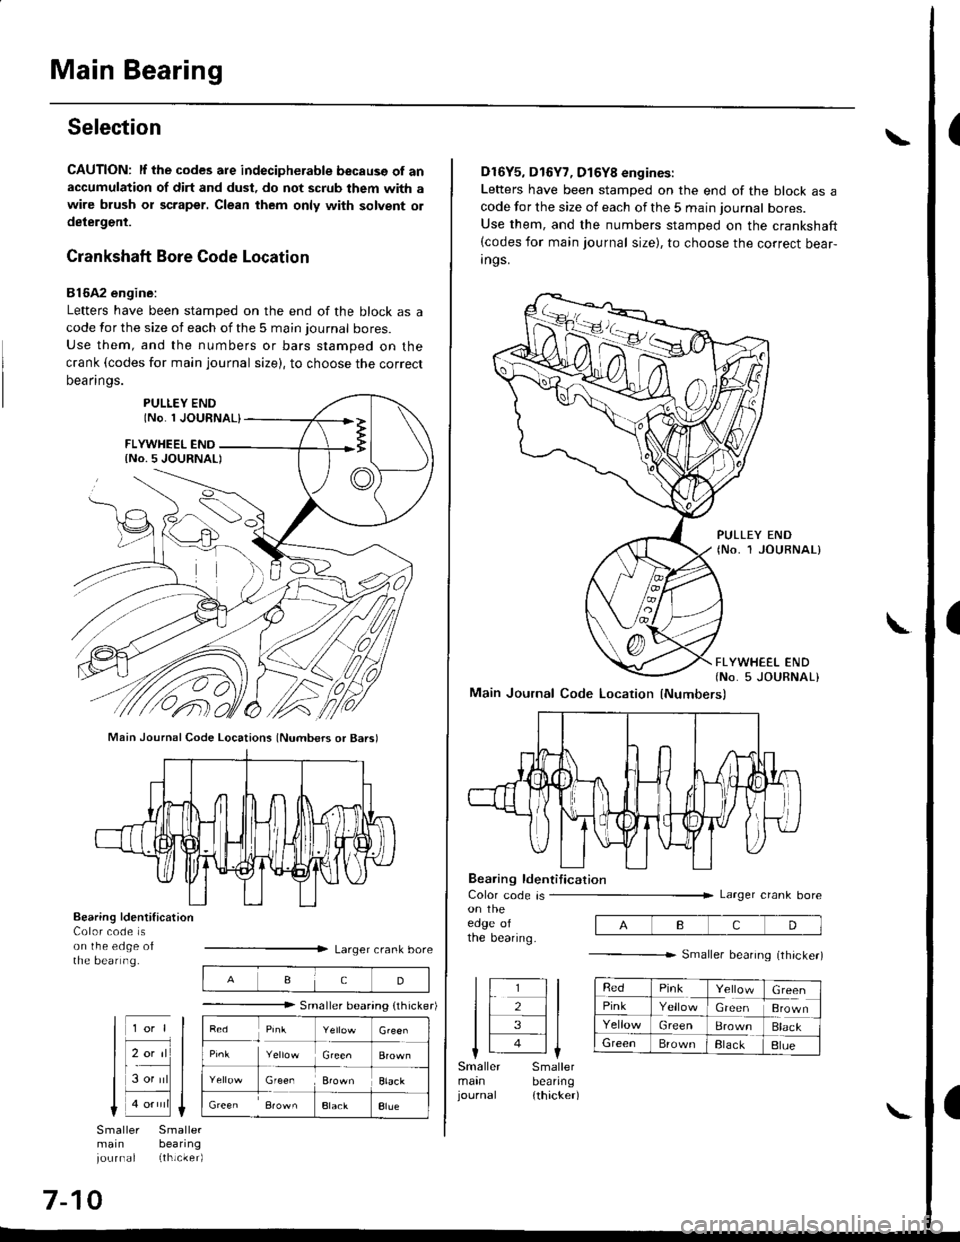 HONDA CIVIC 1999 6.G Workshop Manual Main Bearing
Selection
CAUTION: lf the codes are indecipherable because of anaccumulation of dirt and dust, do not scrub them with a
wire brush or scraper. Clean them only with solvent ol
deiergent.
C